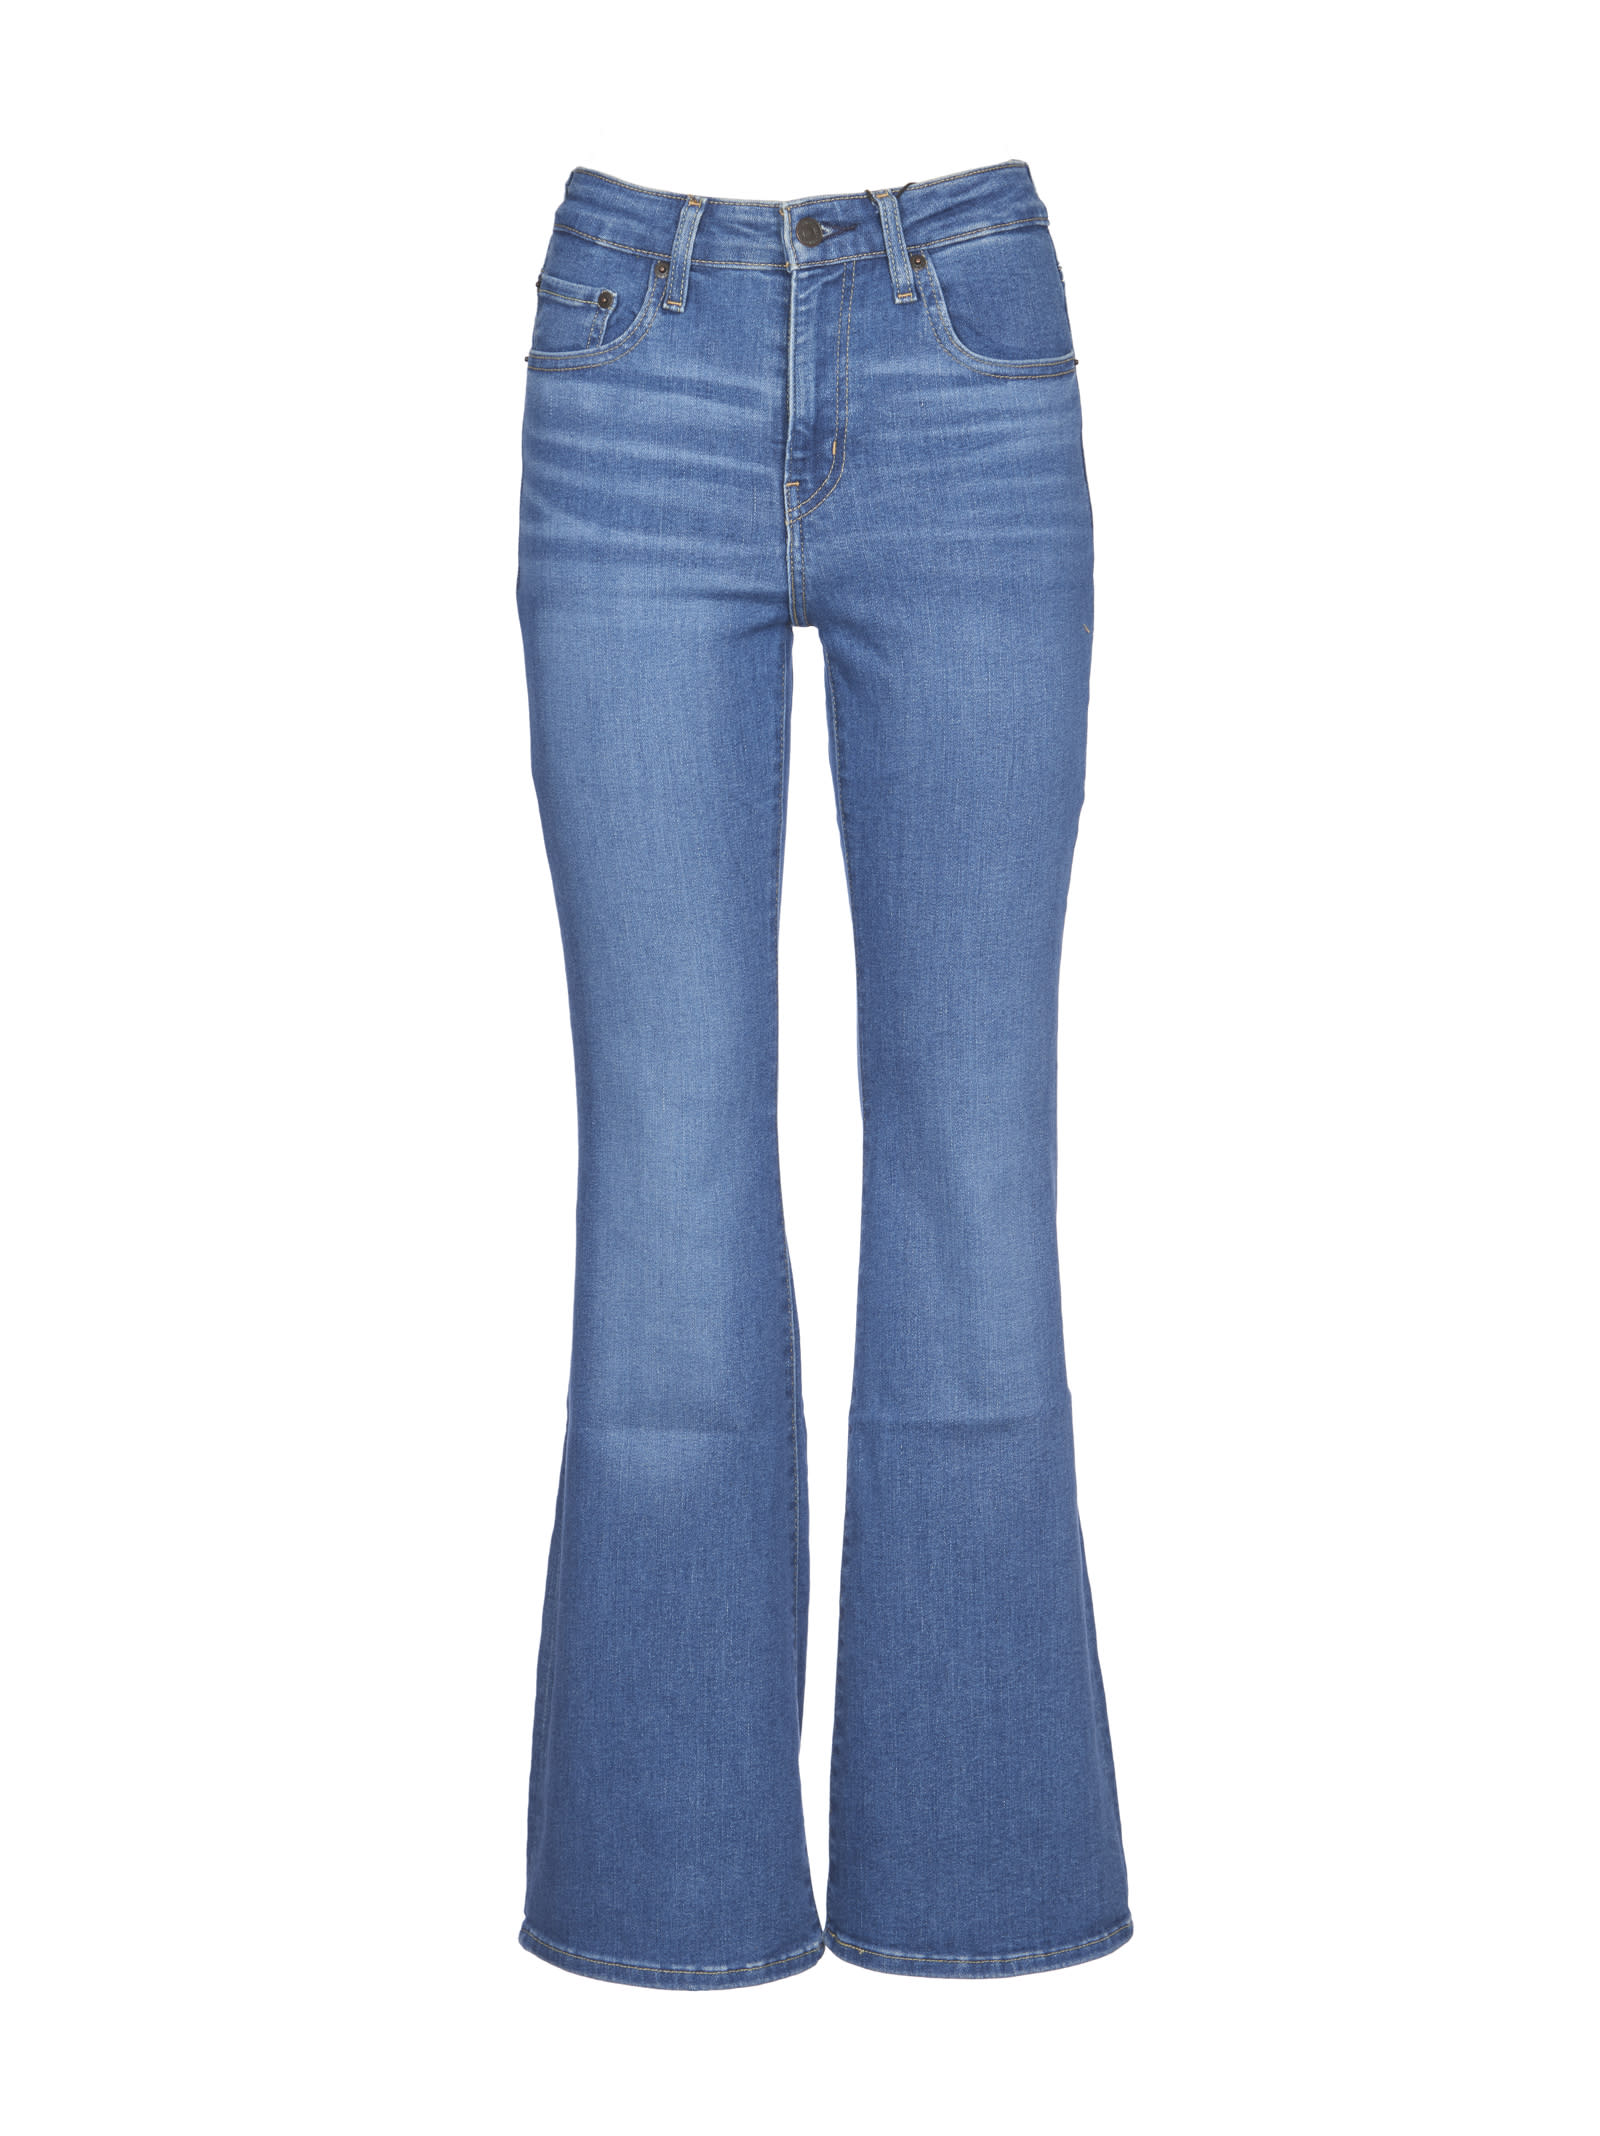 LEVI'S 726 HIGHT FLARE JEANS